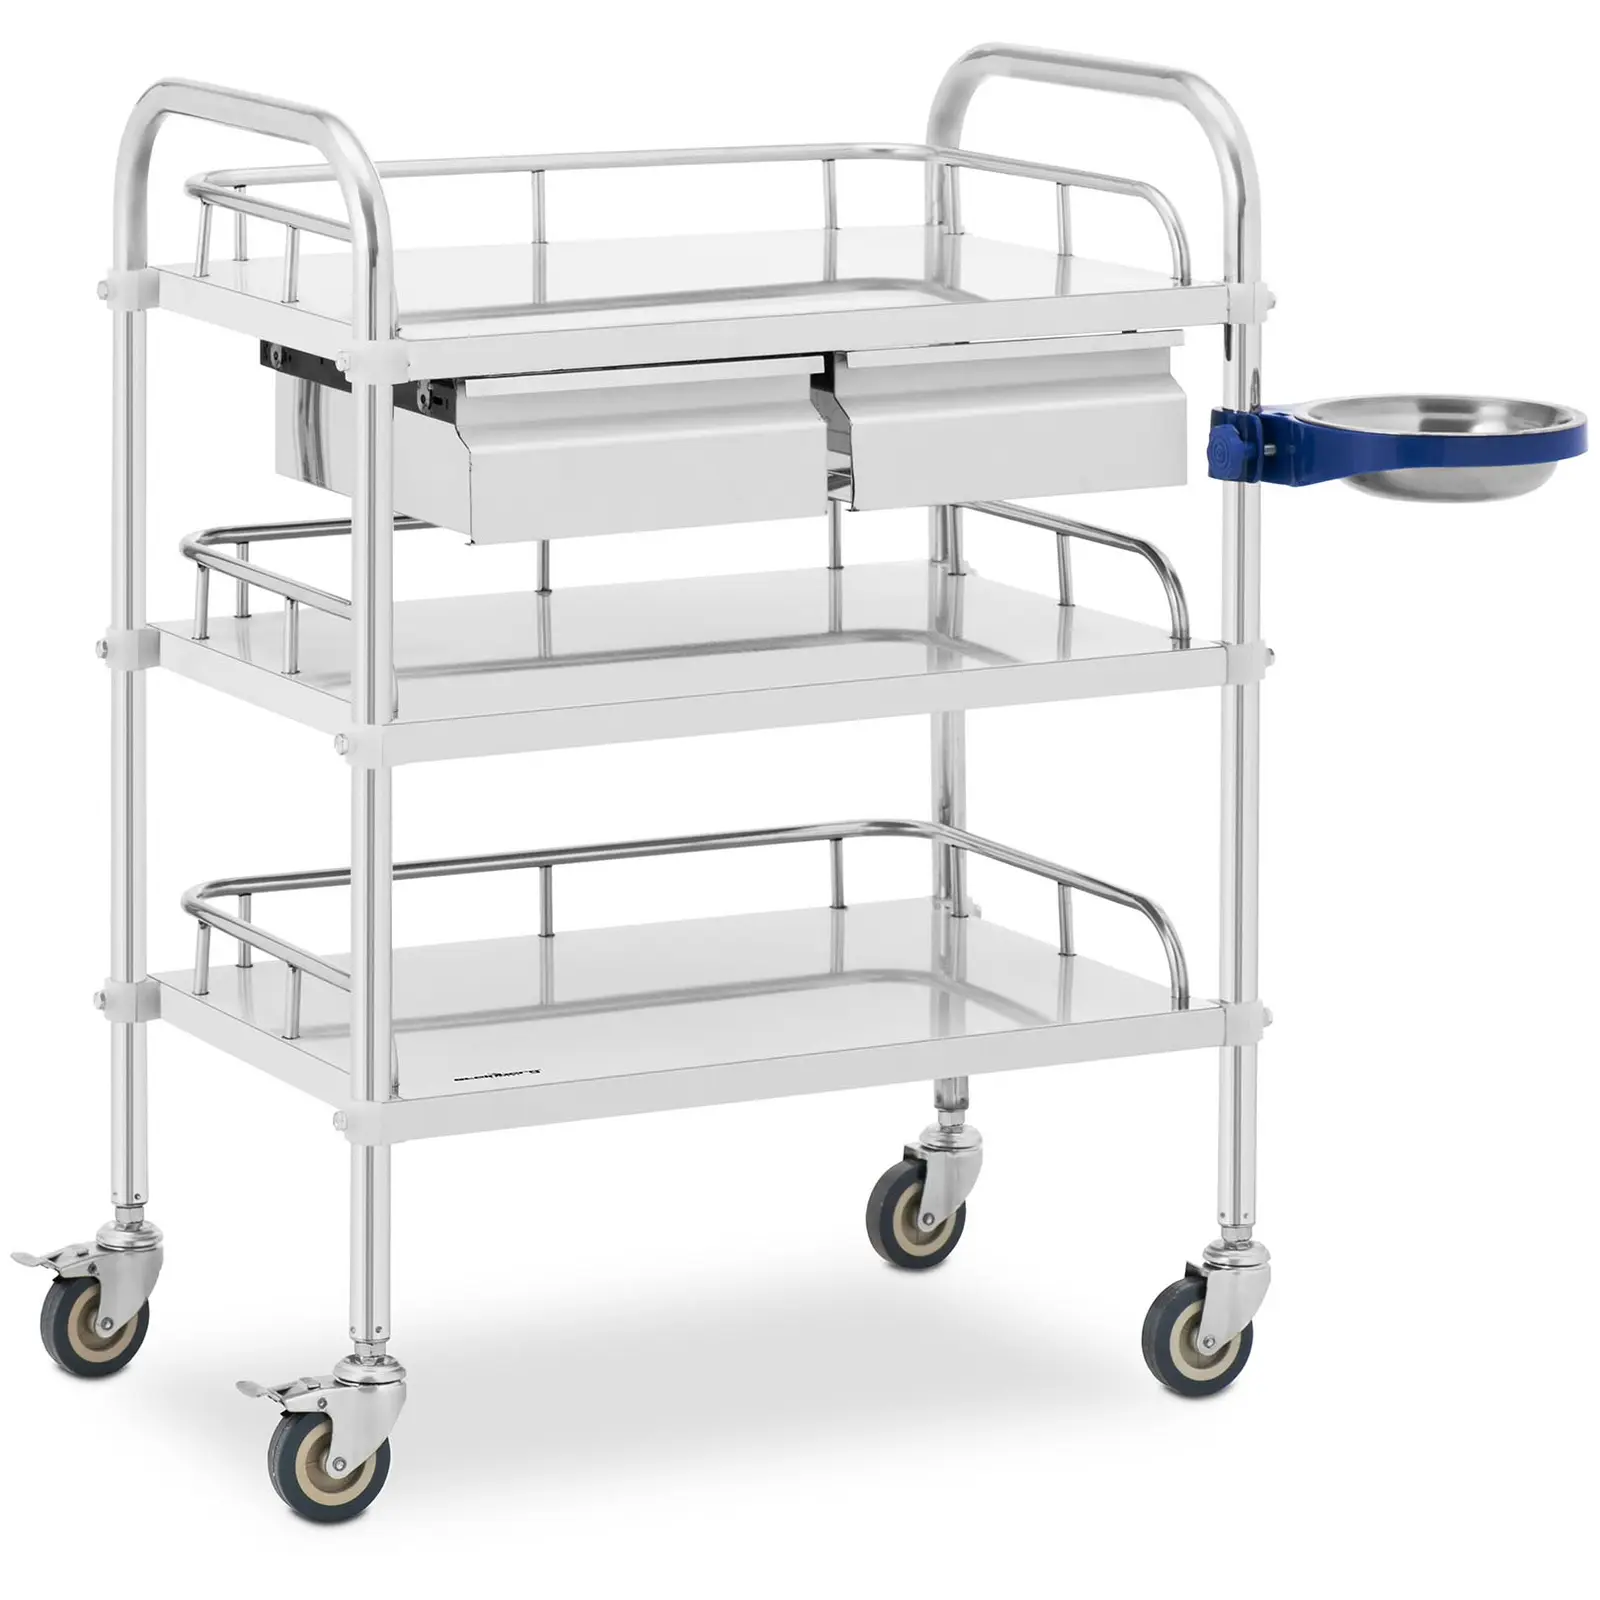 Laboratory Trolley - stainless steel - 3 shelves each 60 x 40 x 13 cm - 2 drawers - 15 kg - compact